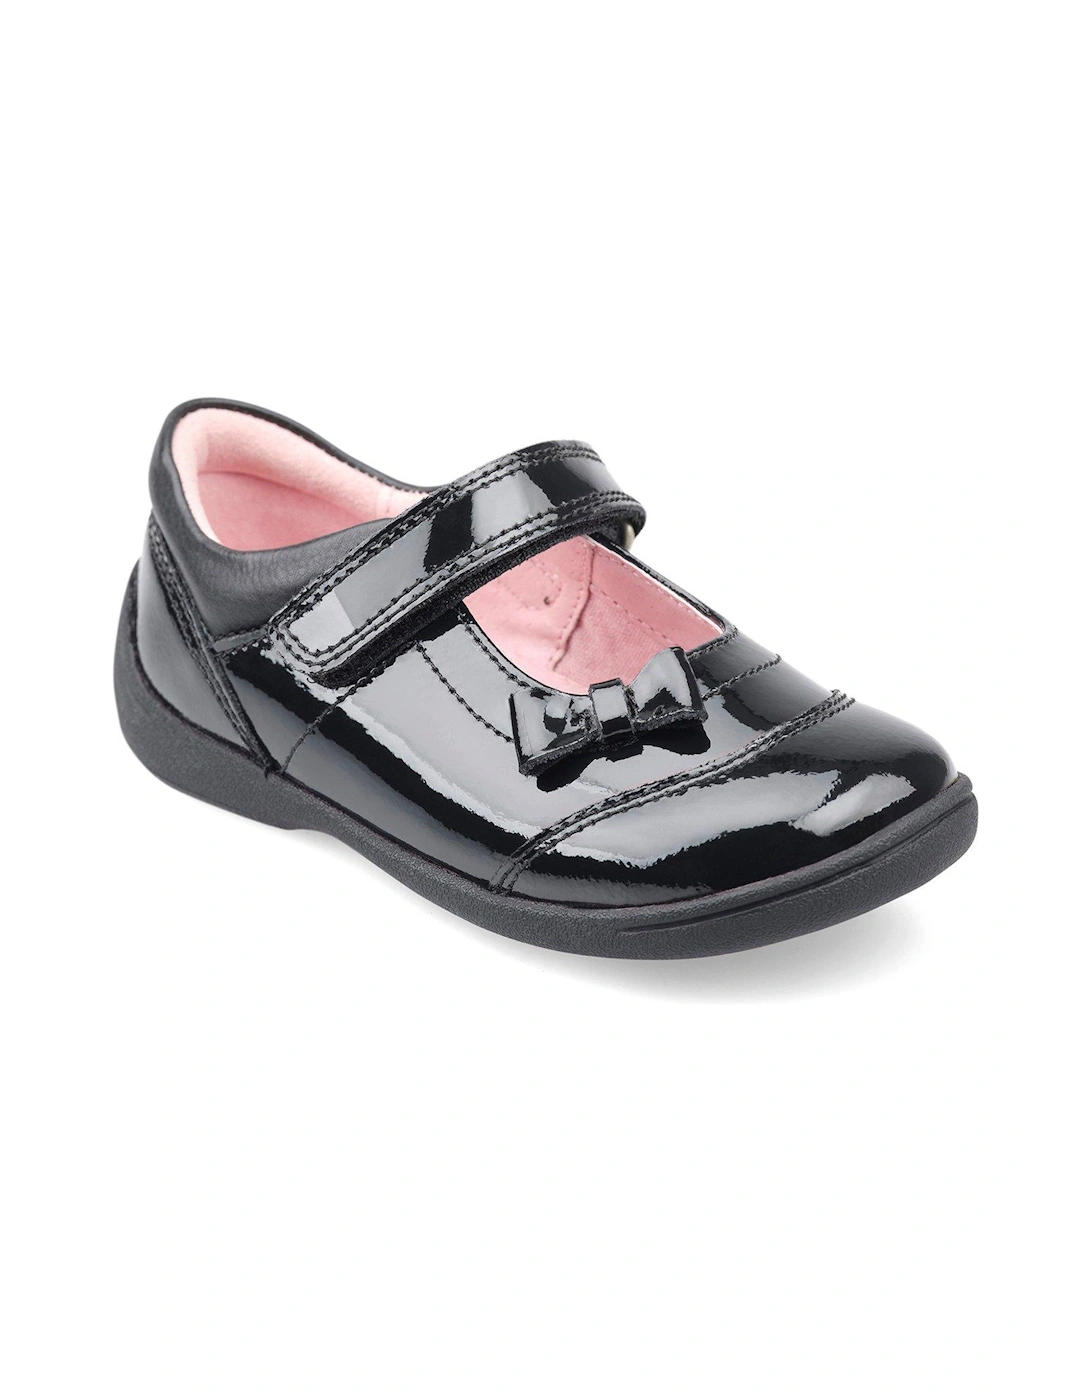 Girls Twizzle Patent Leather First School Shoes with Bow - Black, 2 of 1